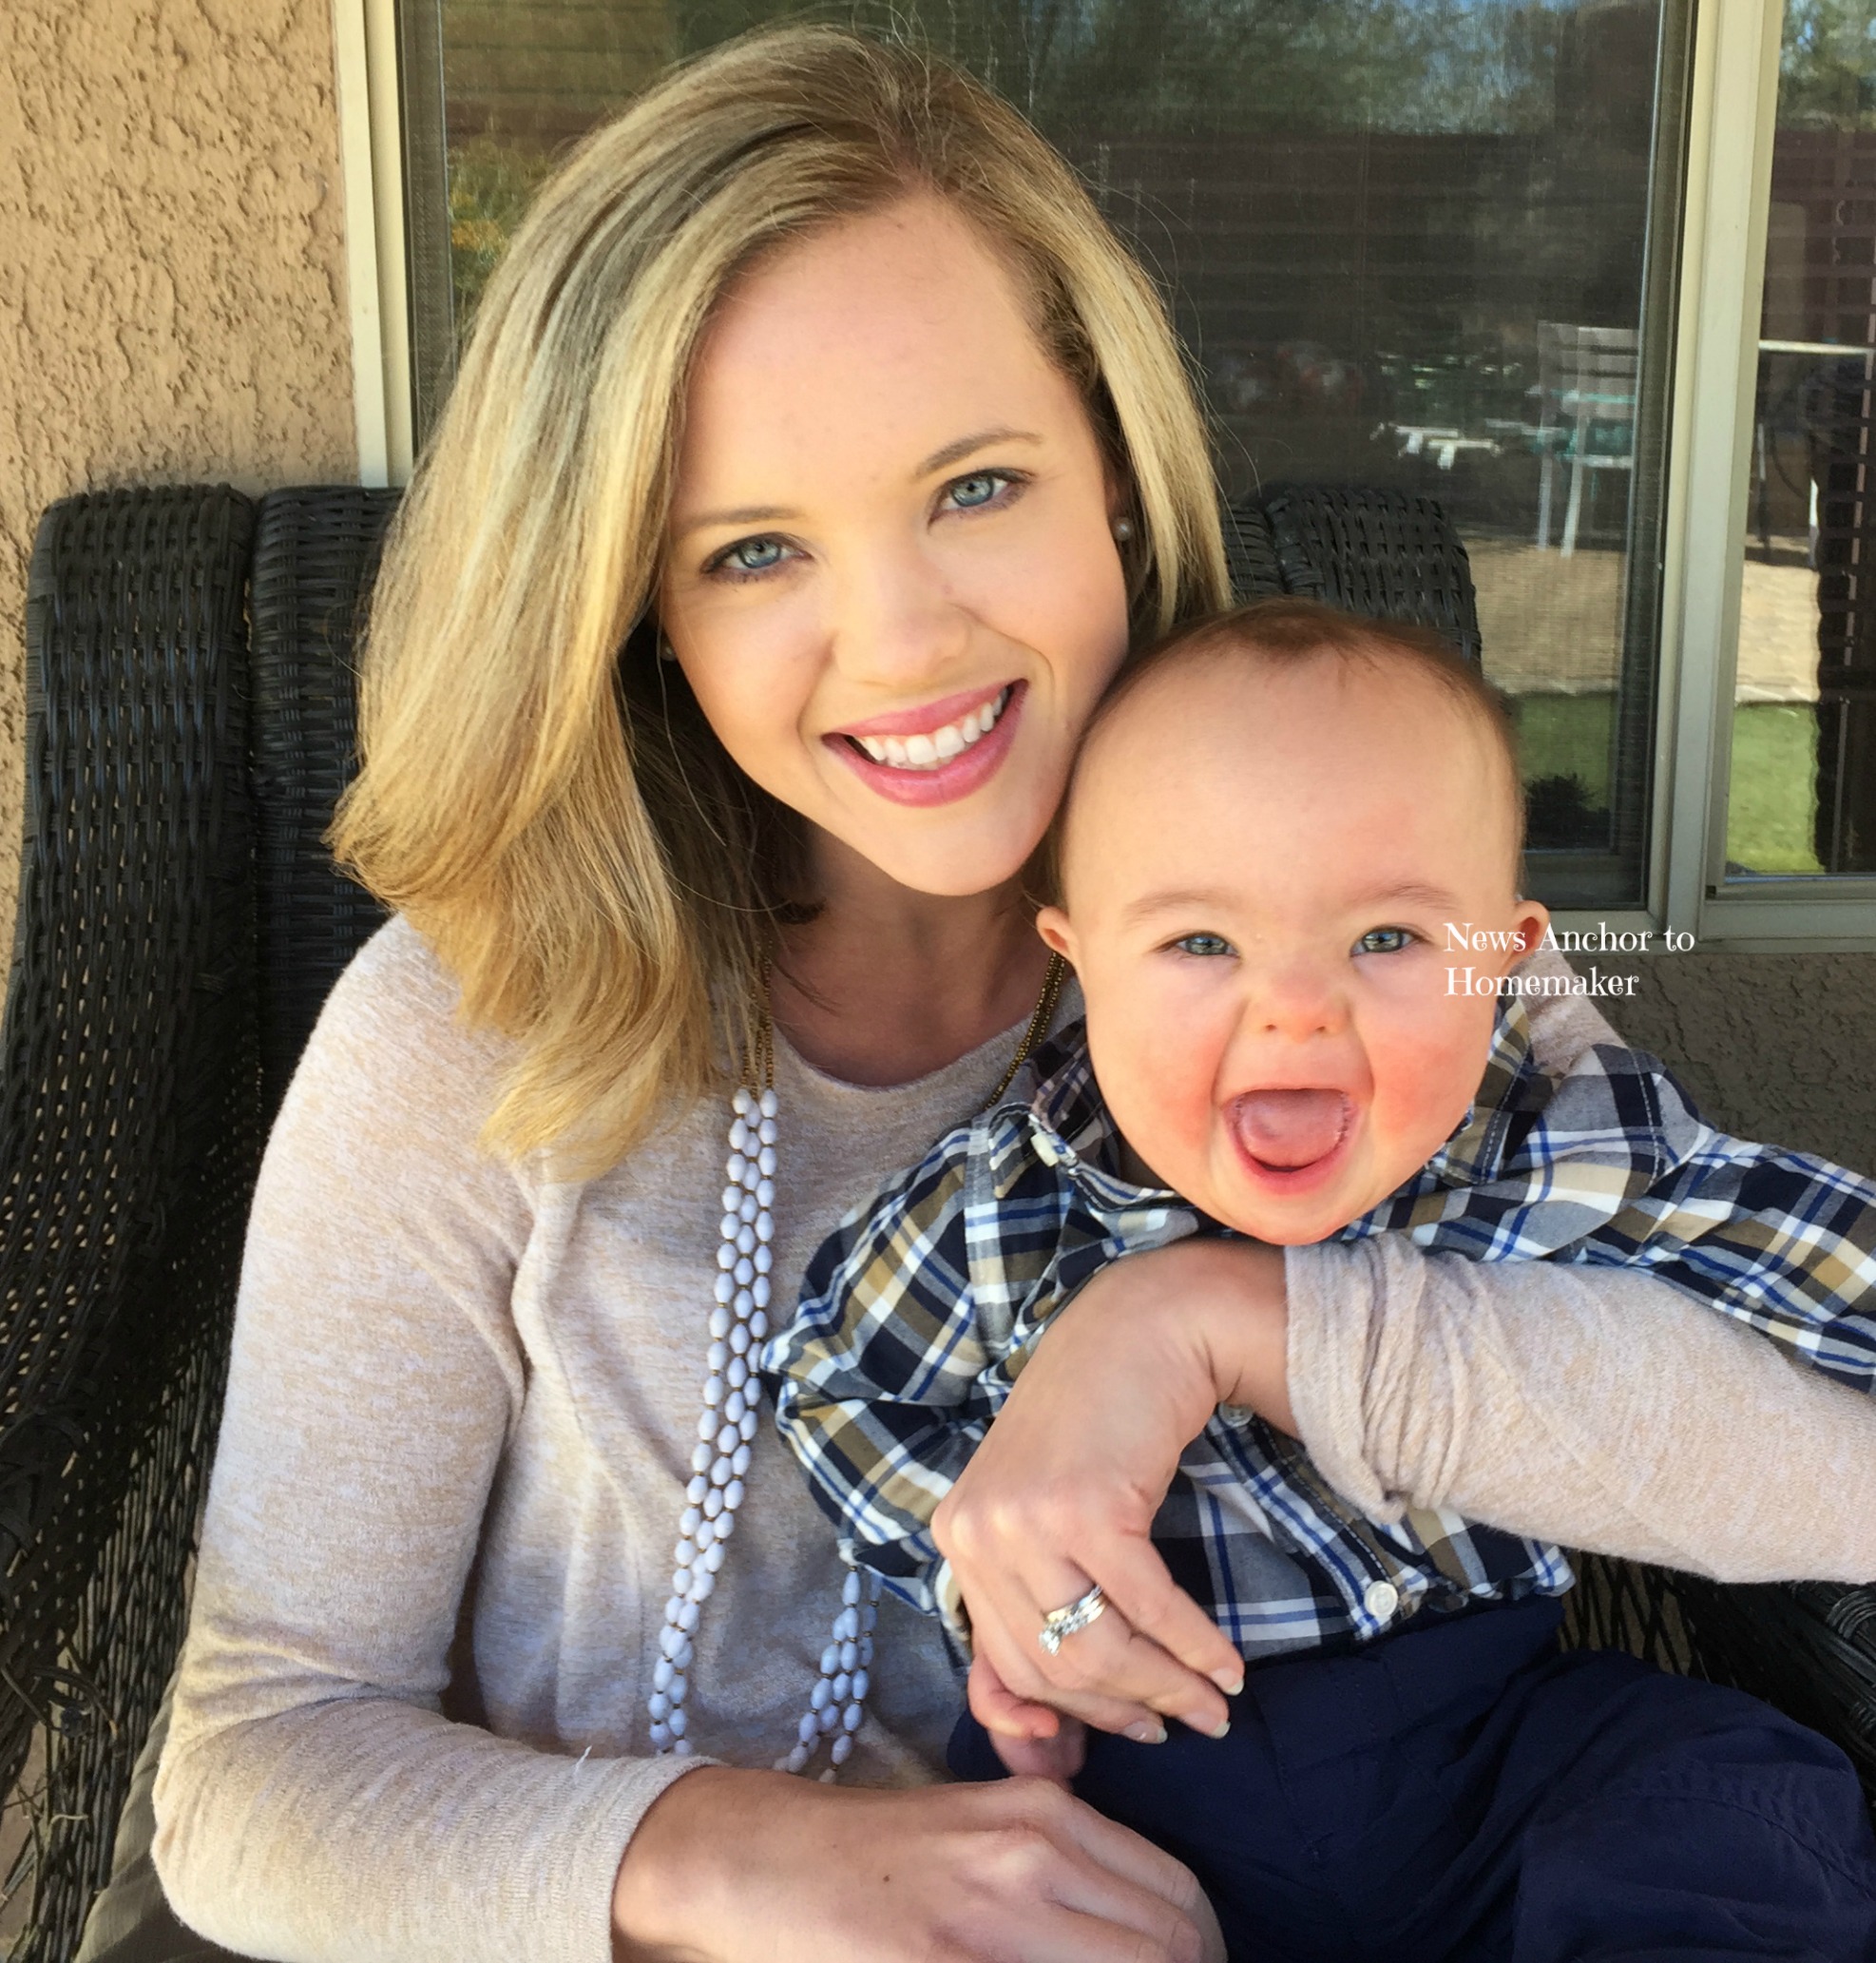 Jillian and her son Anderson smiling